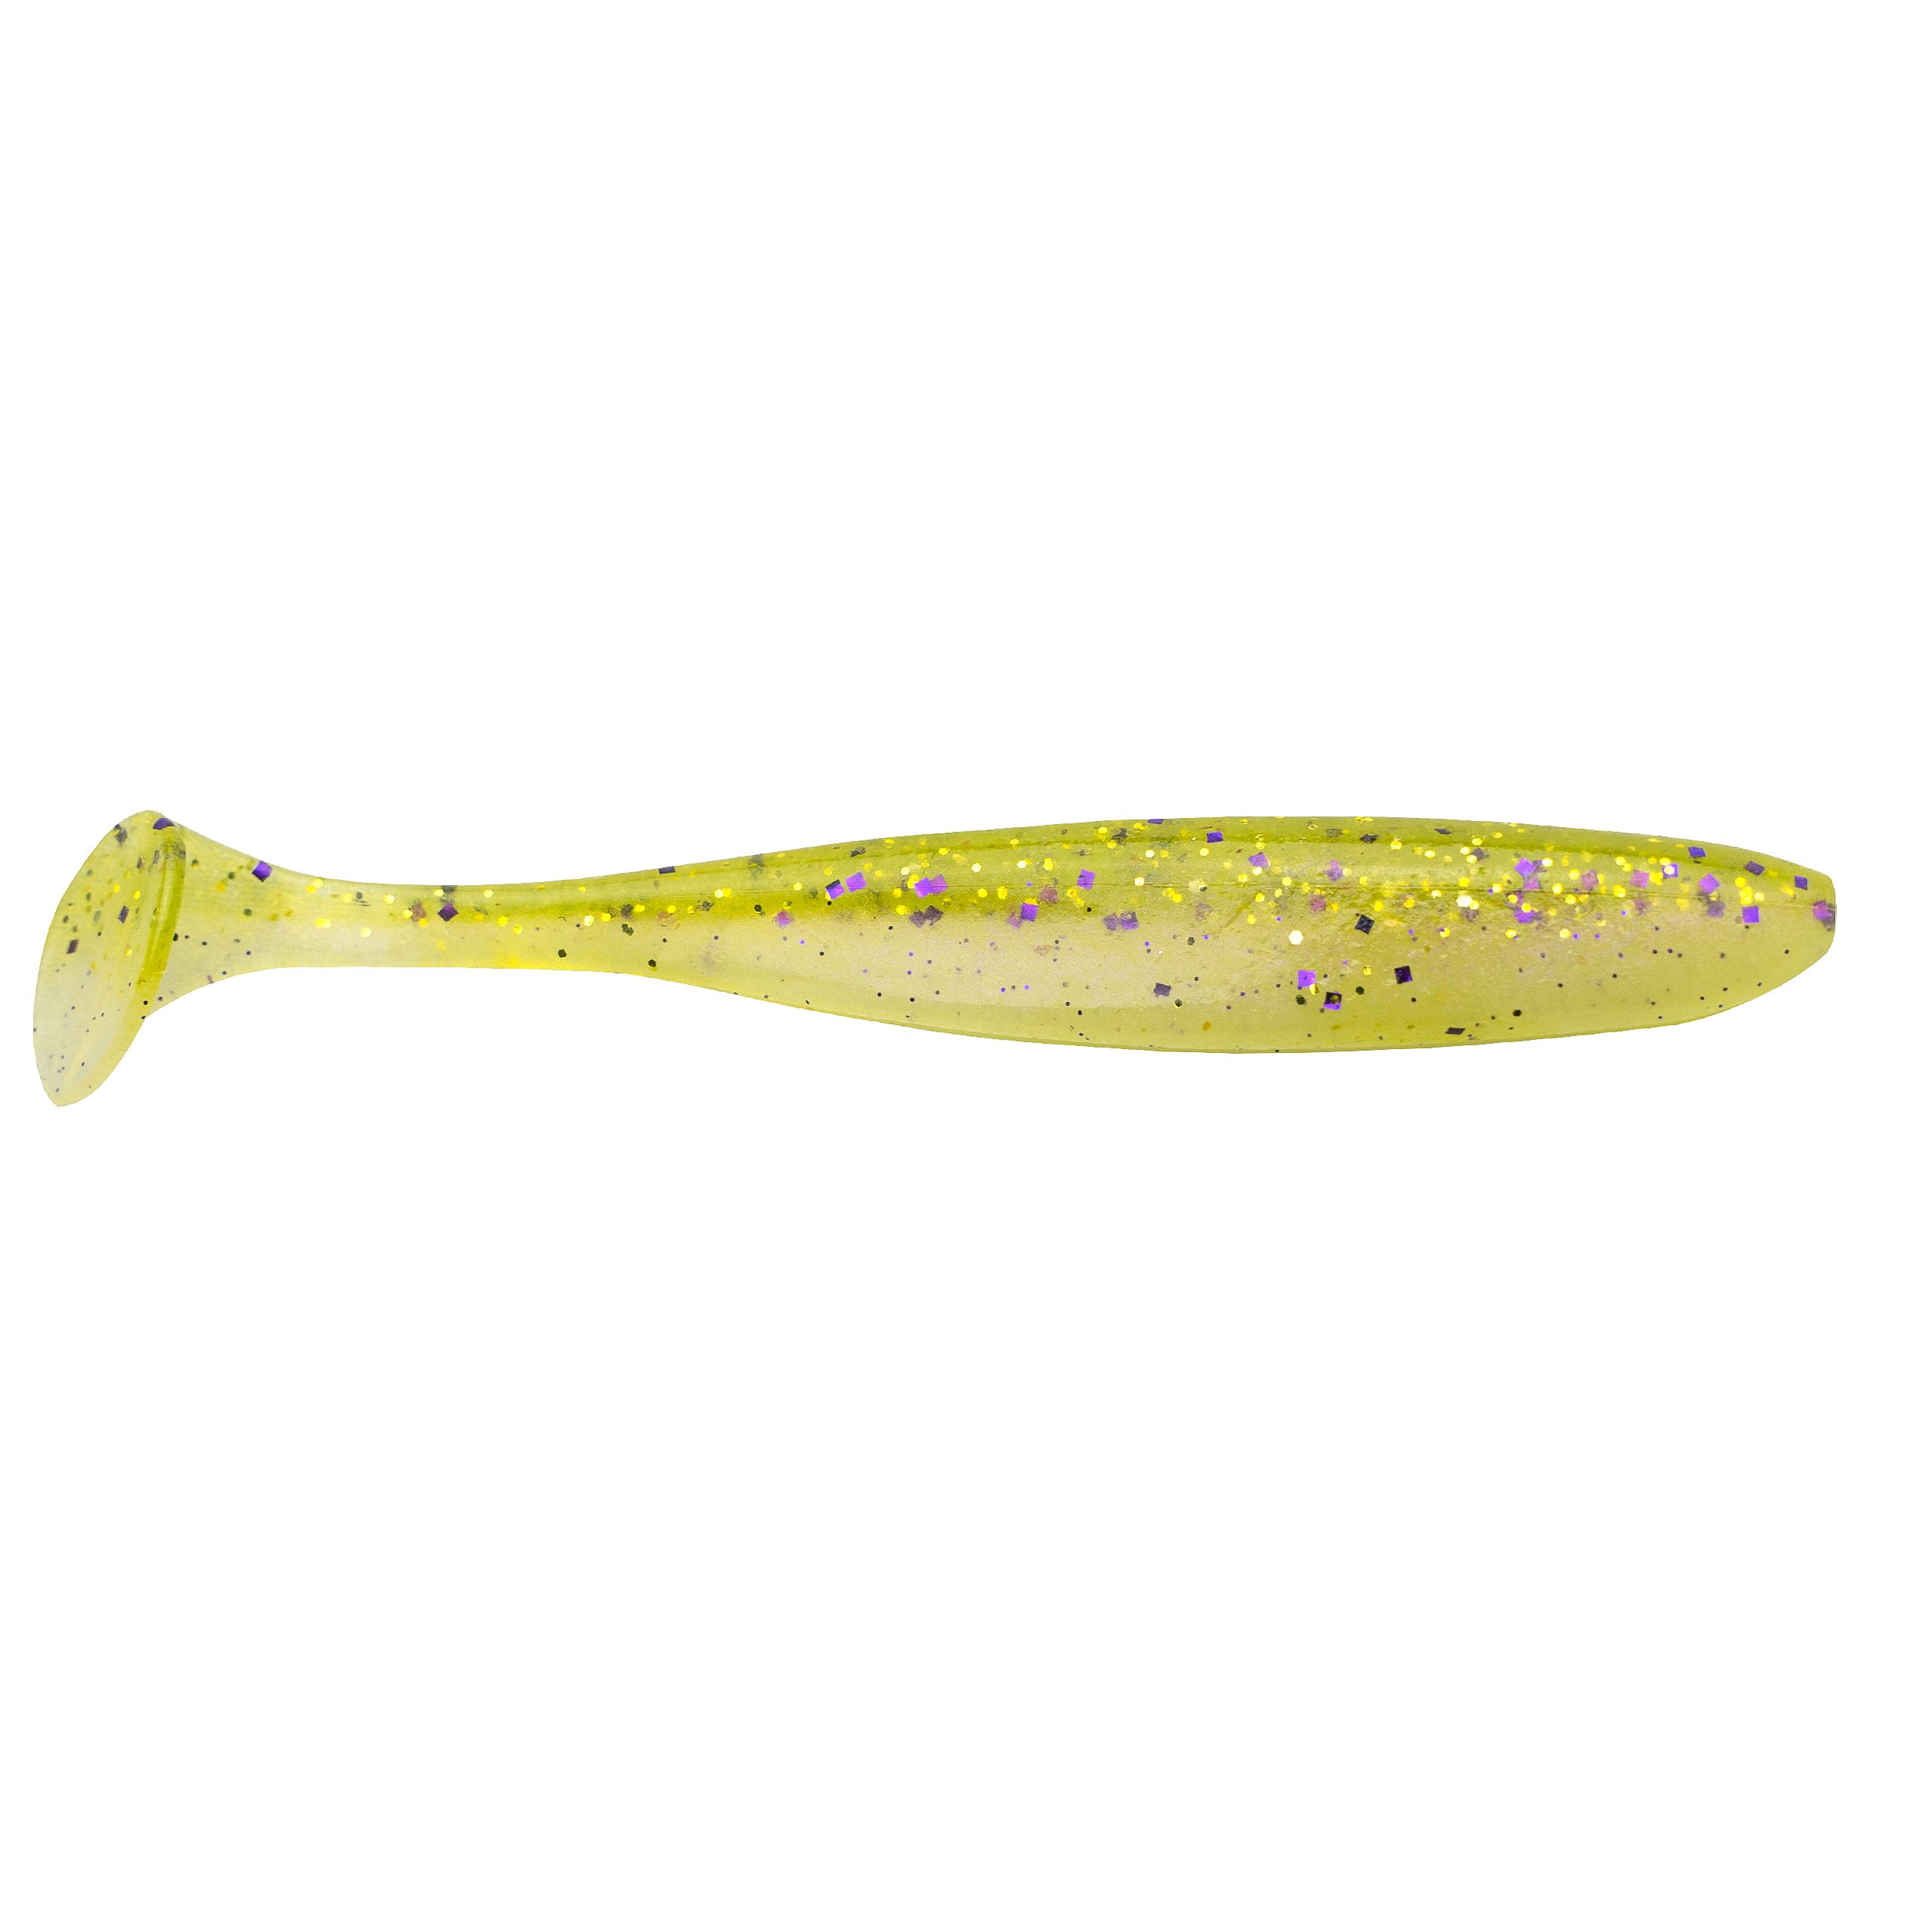 Keitech Easy Shiner Swimbait 4 - Dick Smith's Live Bait & Tackle